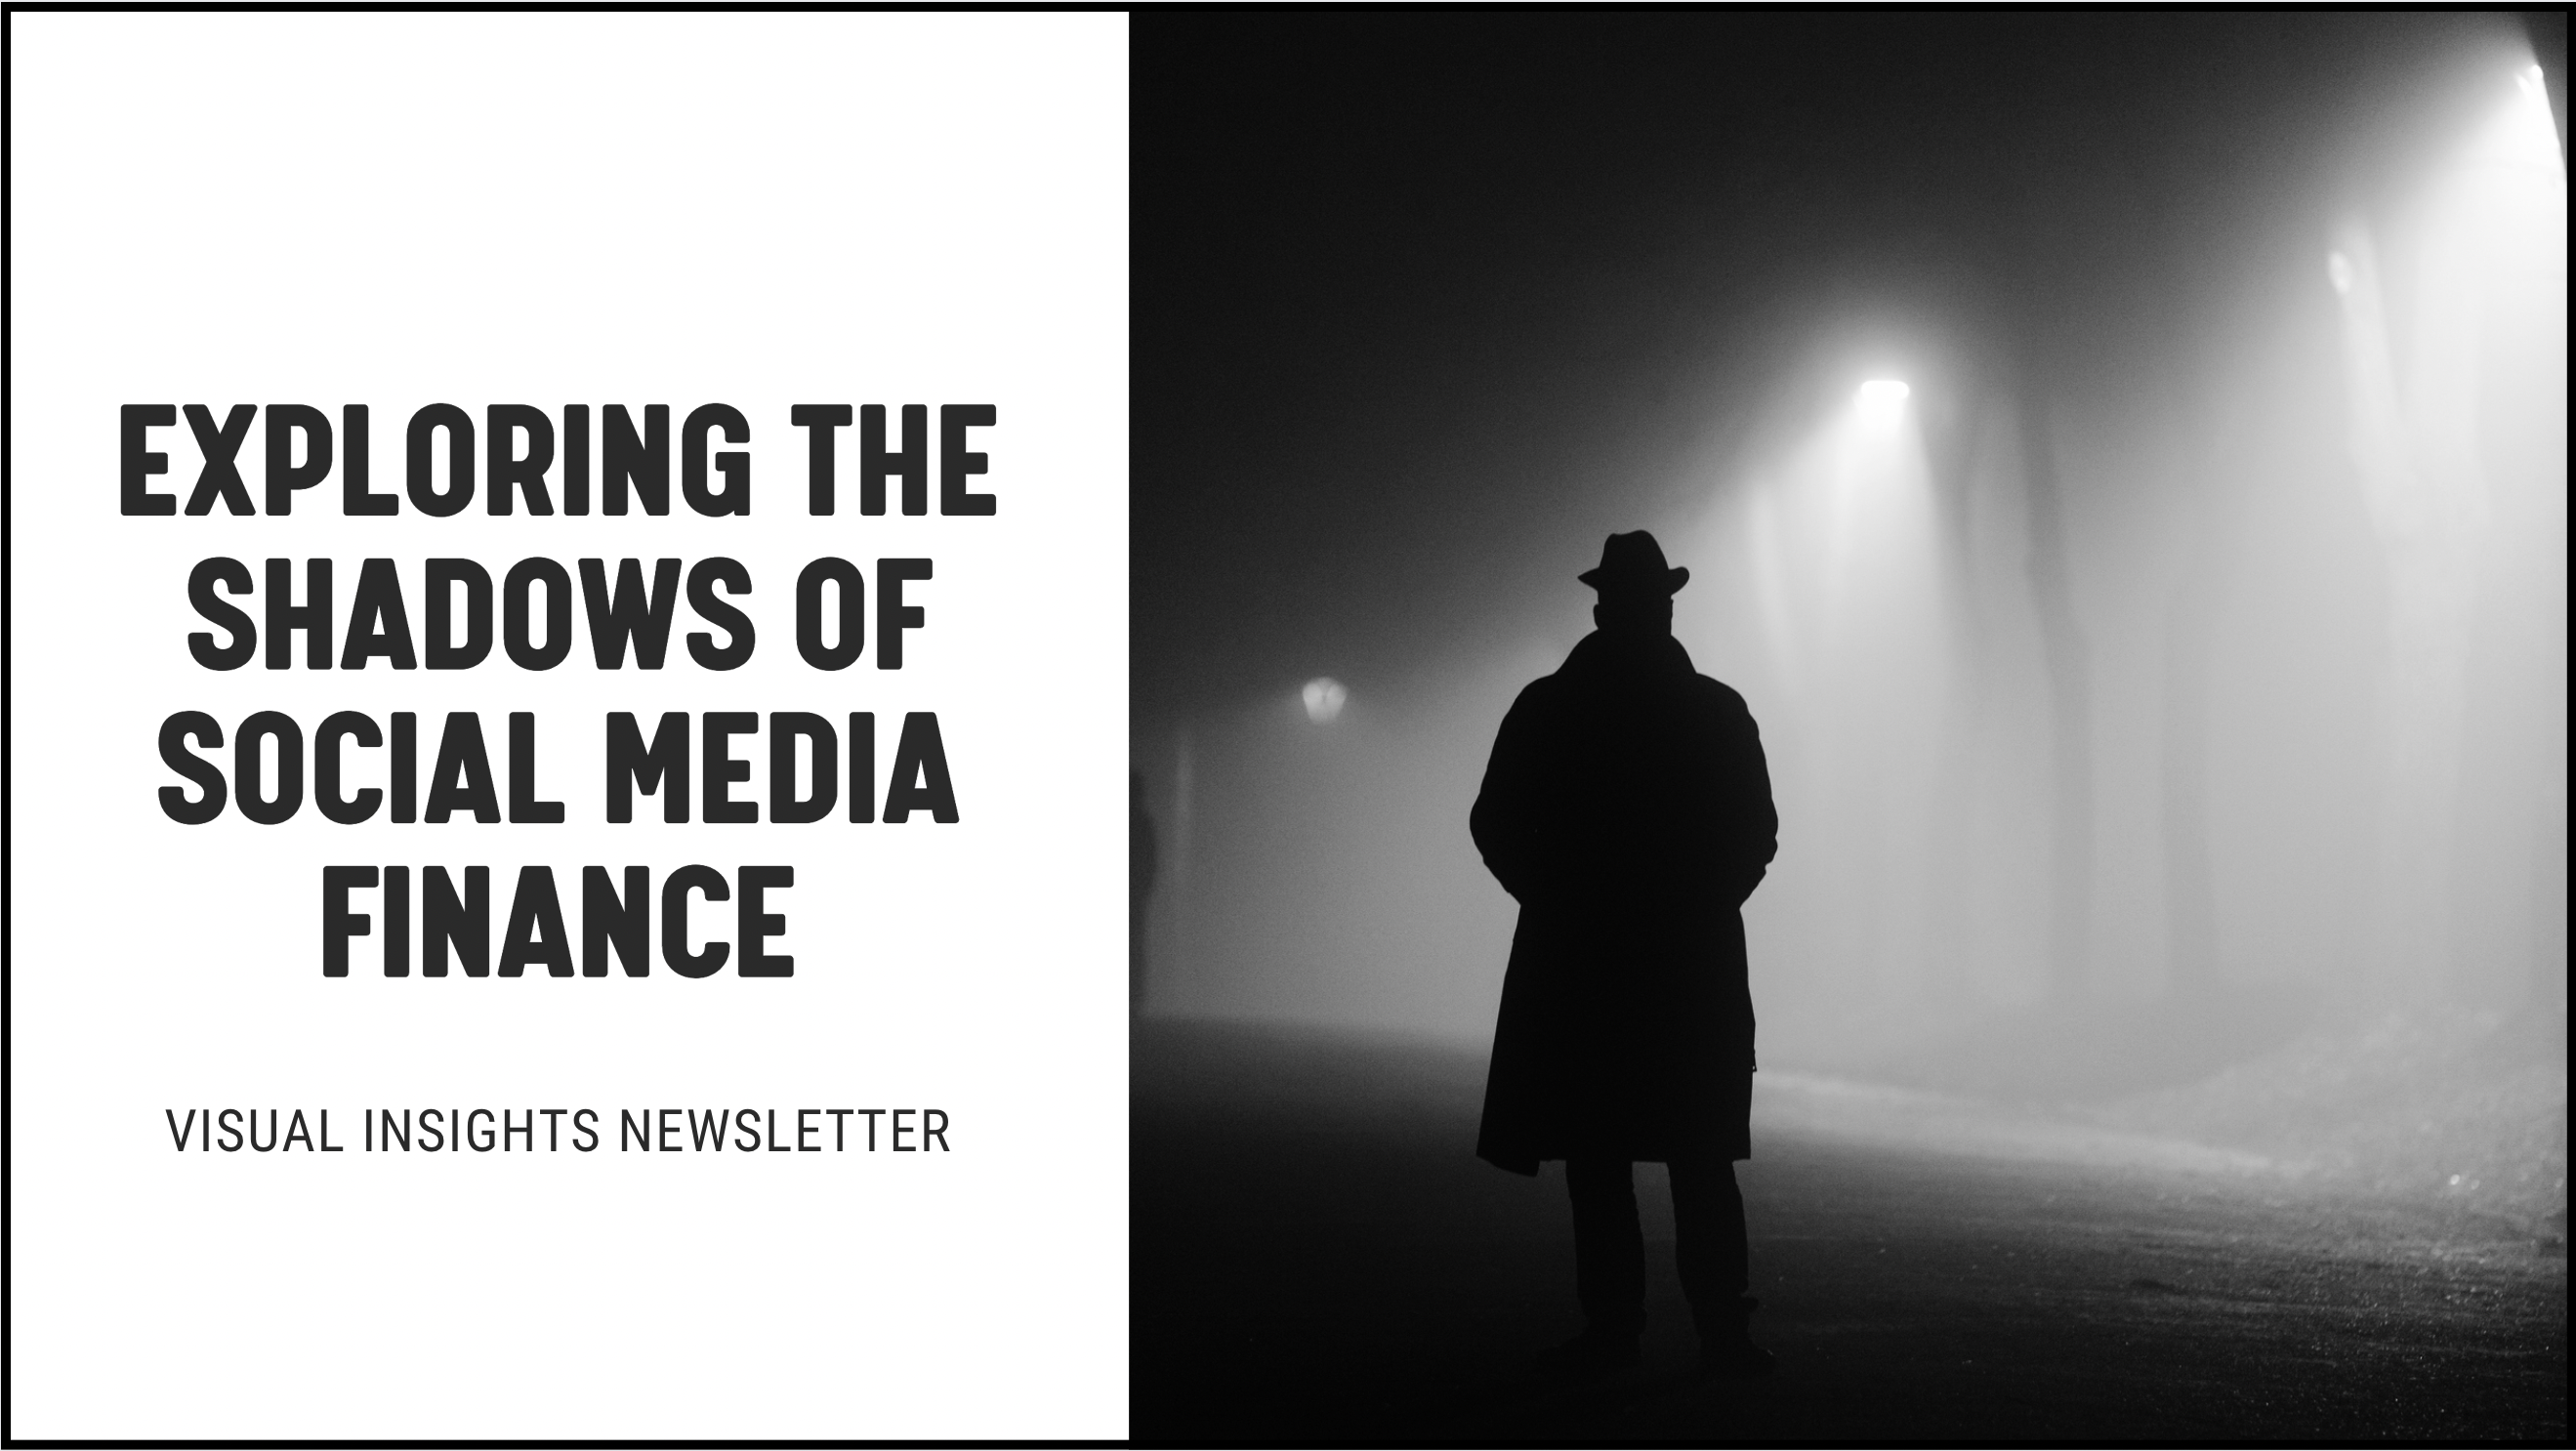 [NEW] Exploring the Shadows of Social Media Finance - Visual Insights Newsletter Marketing Campaigns For Financial Advisors